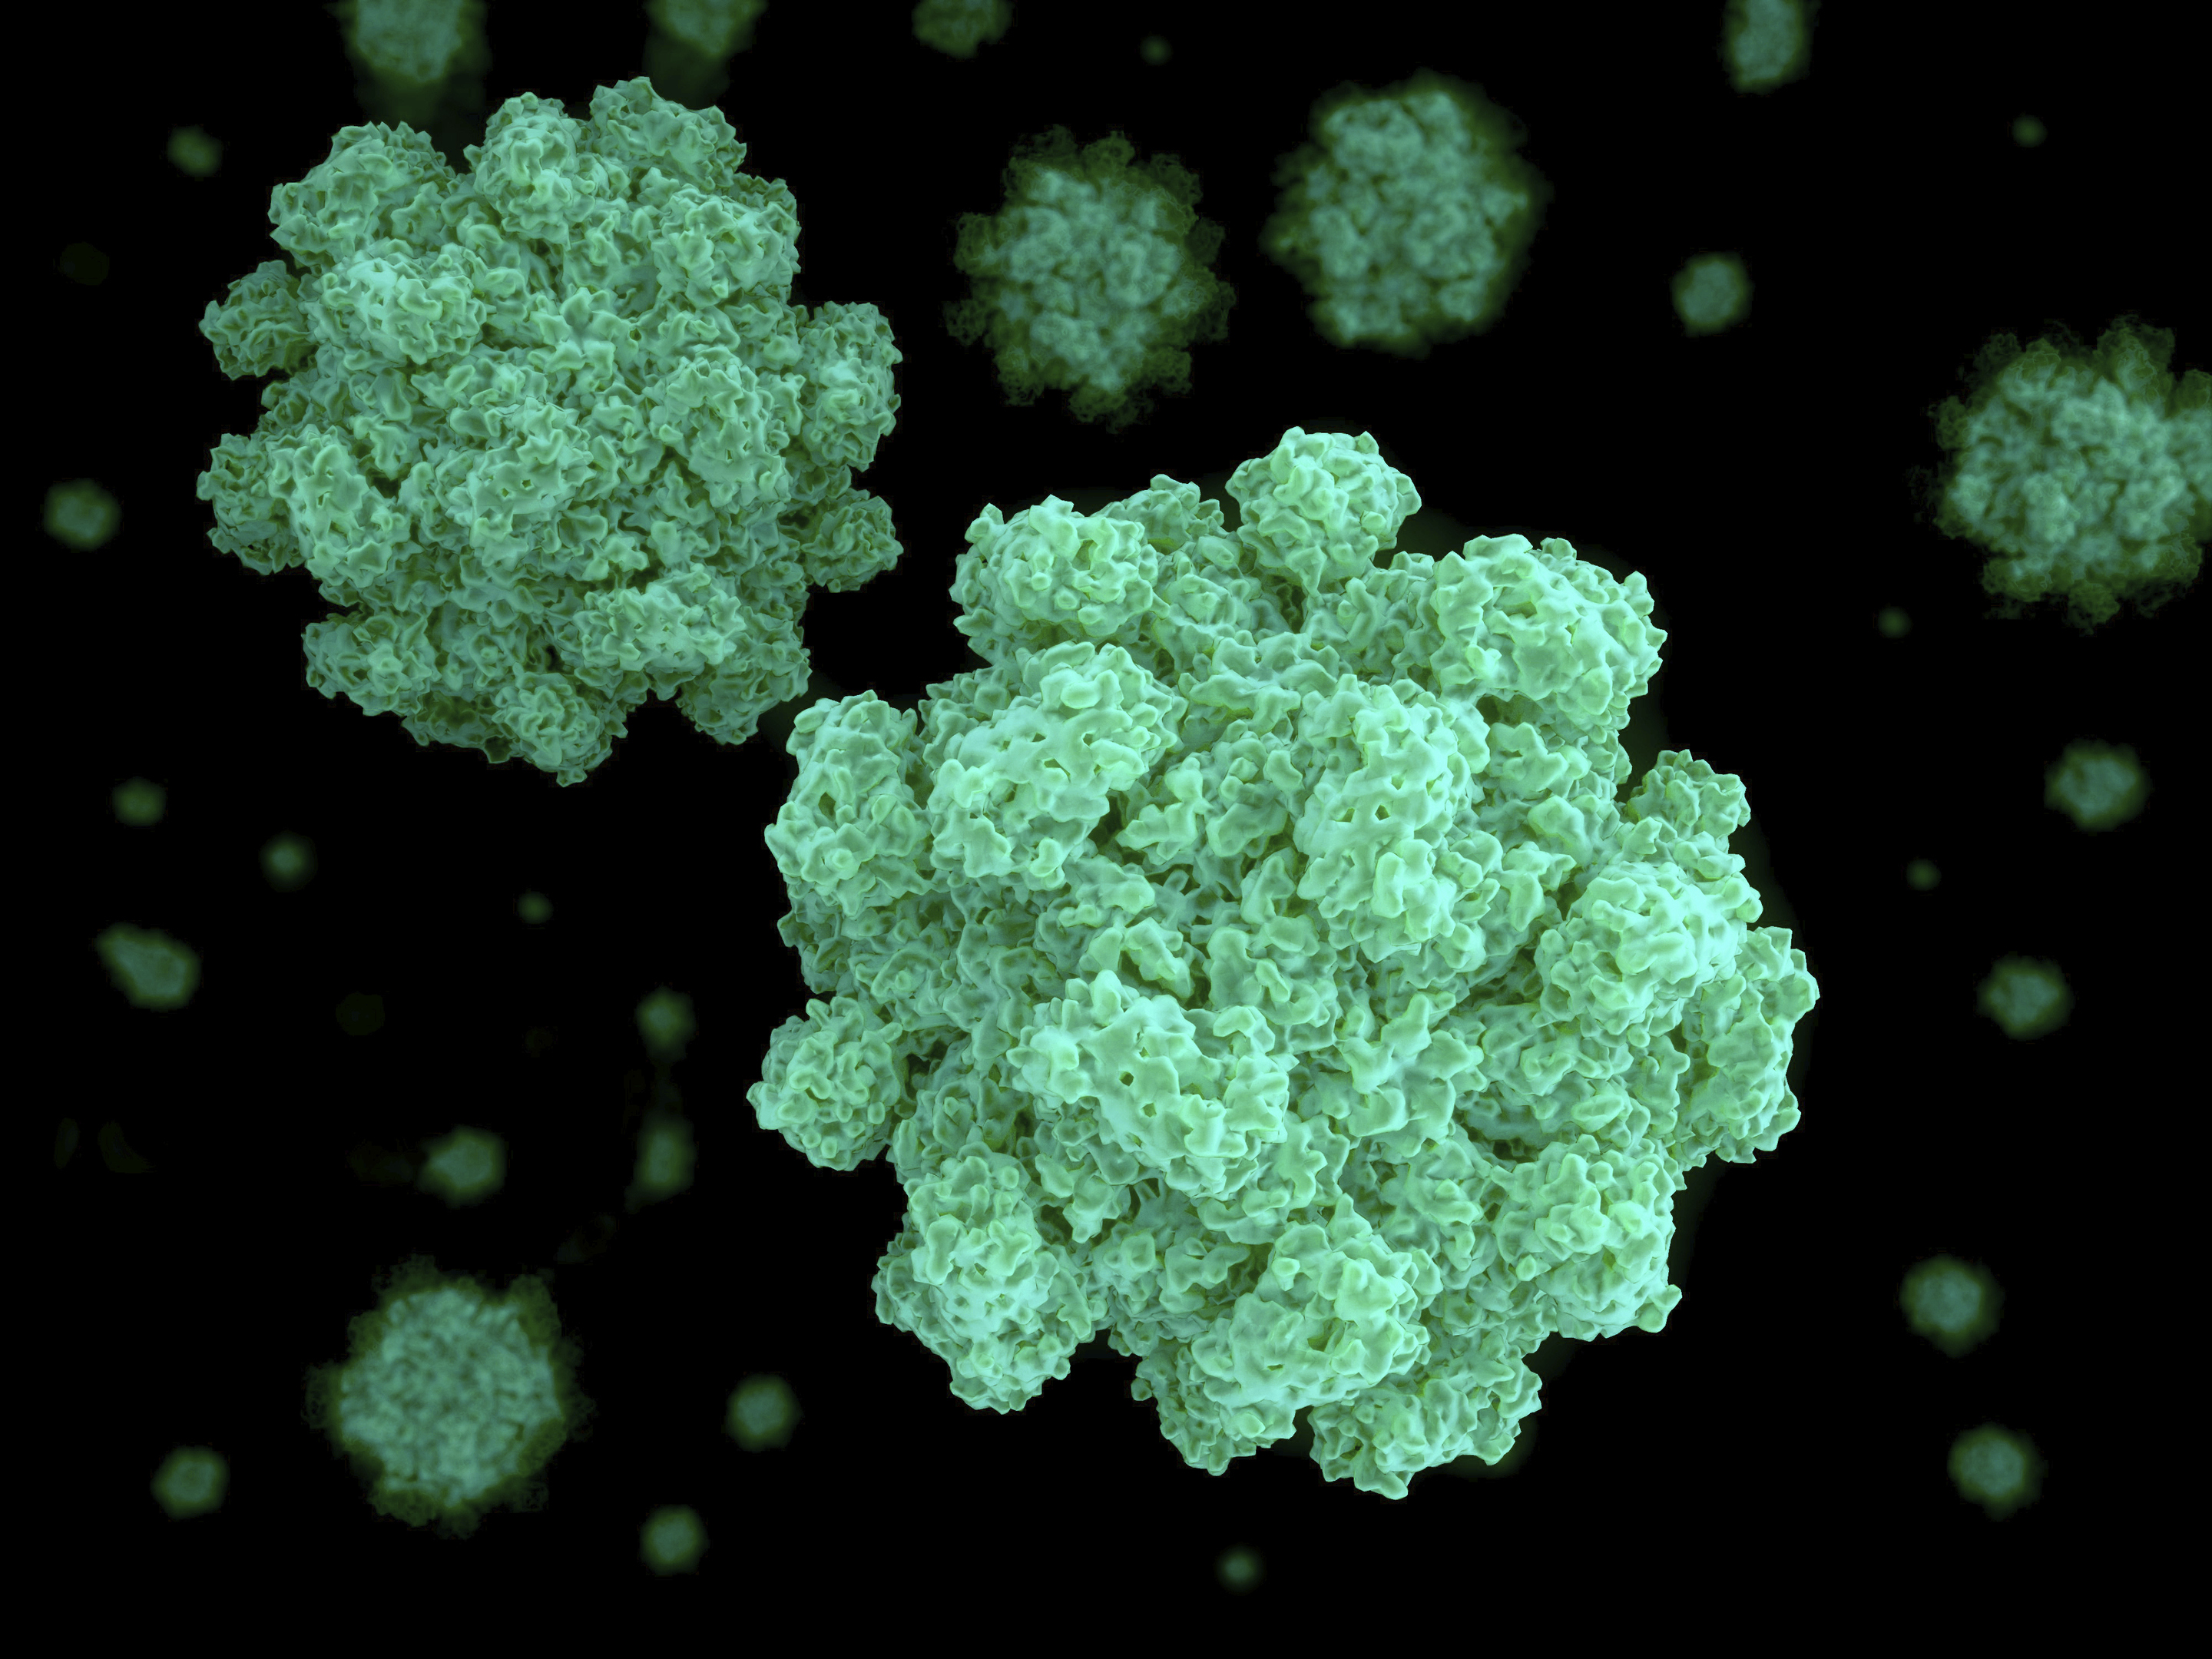 Norovirus, also known as the winter vomiting bug